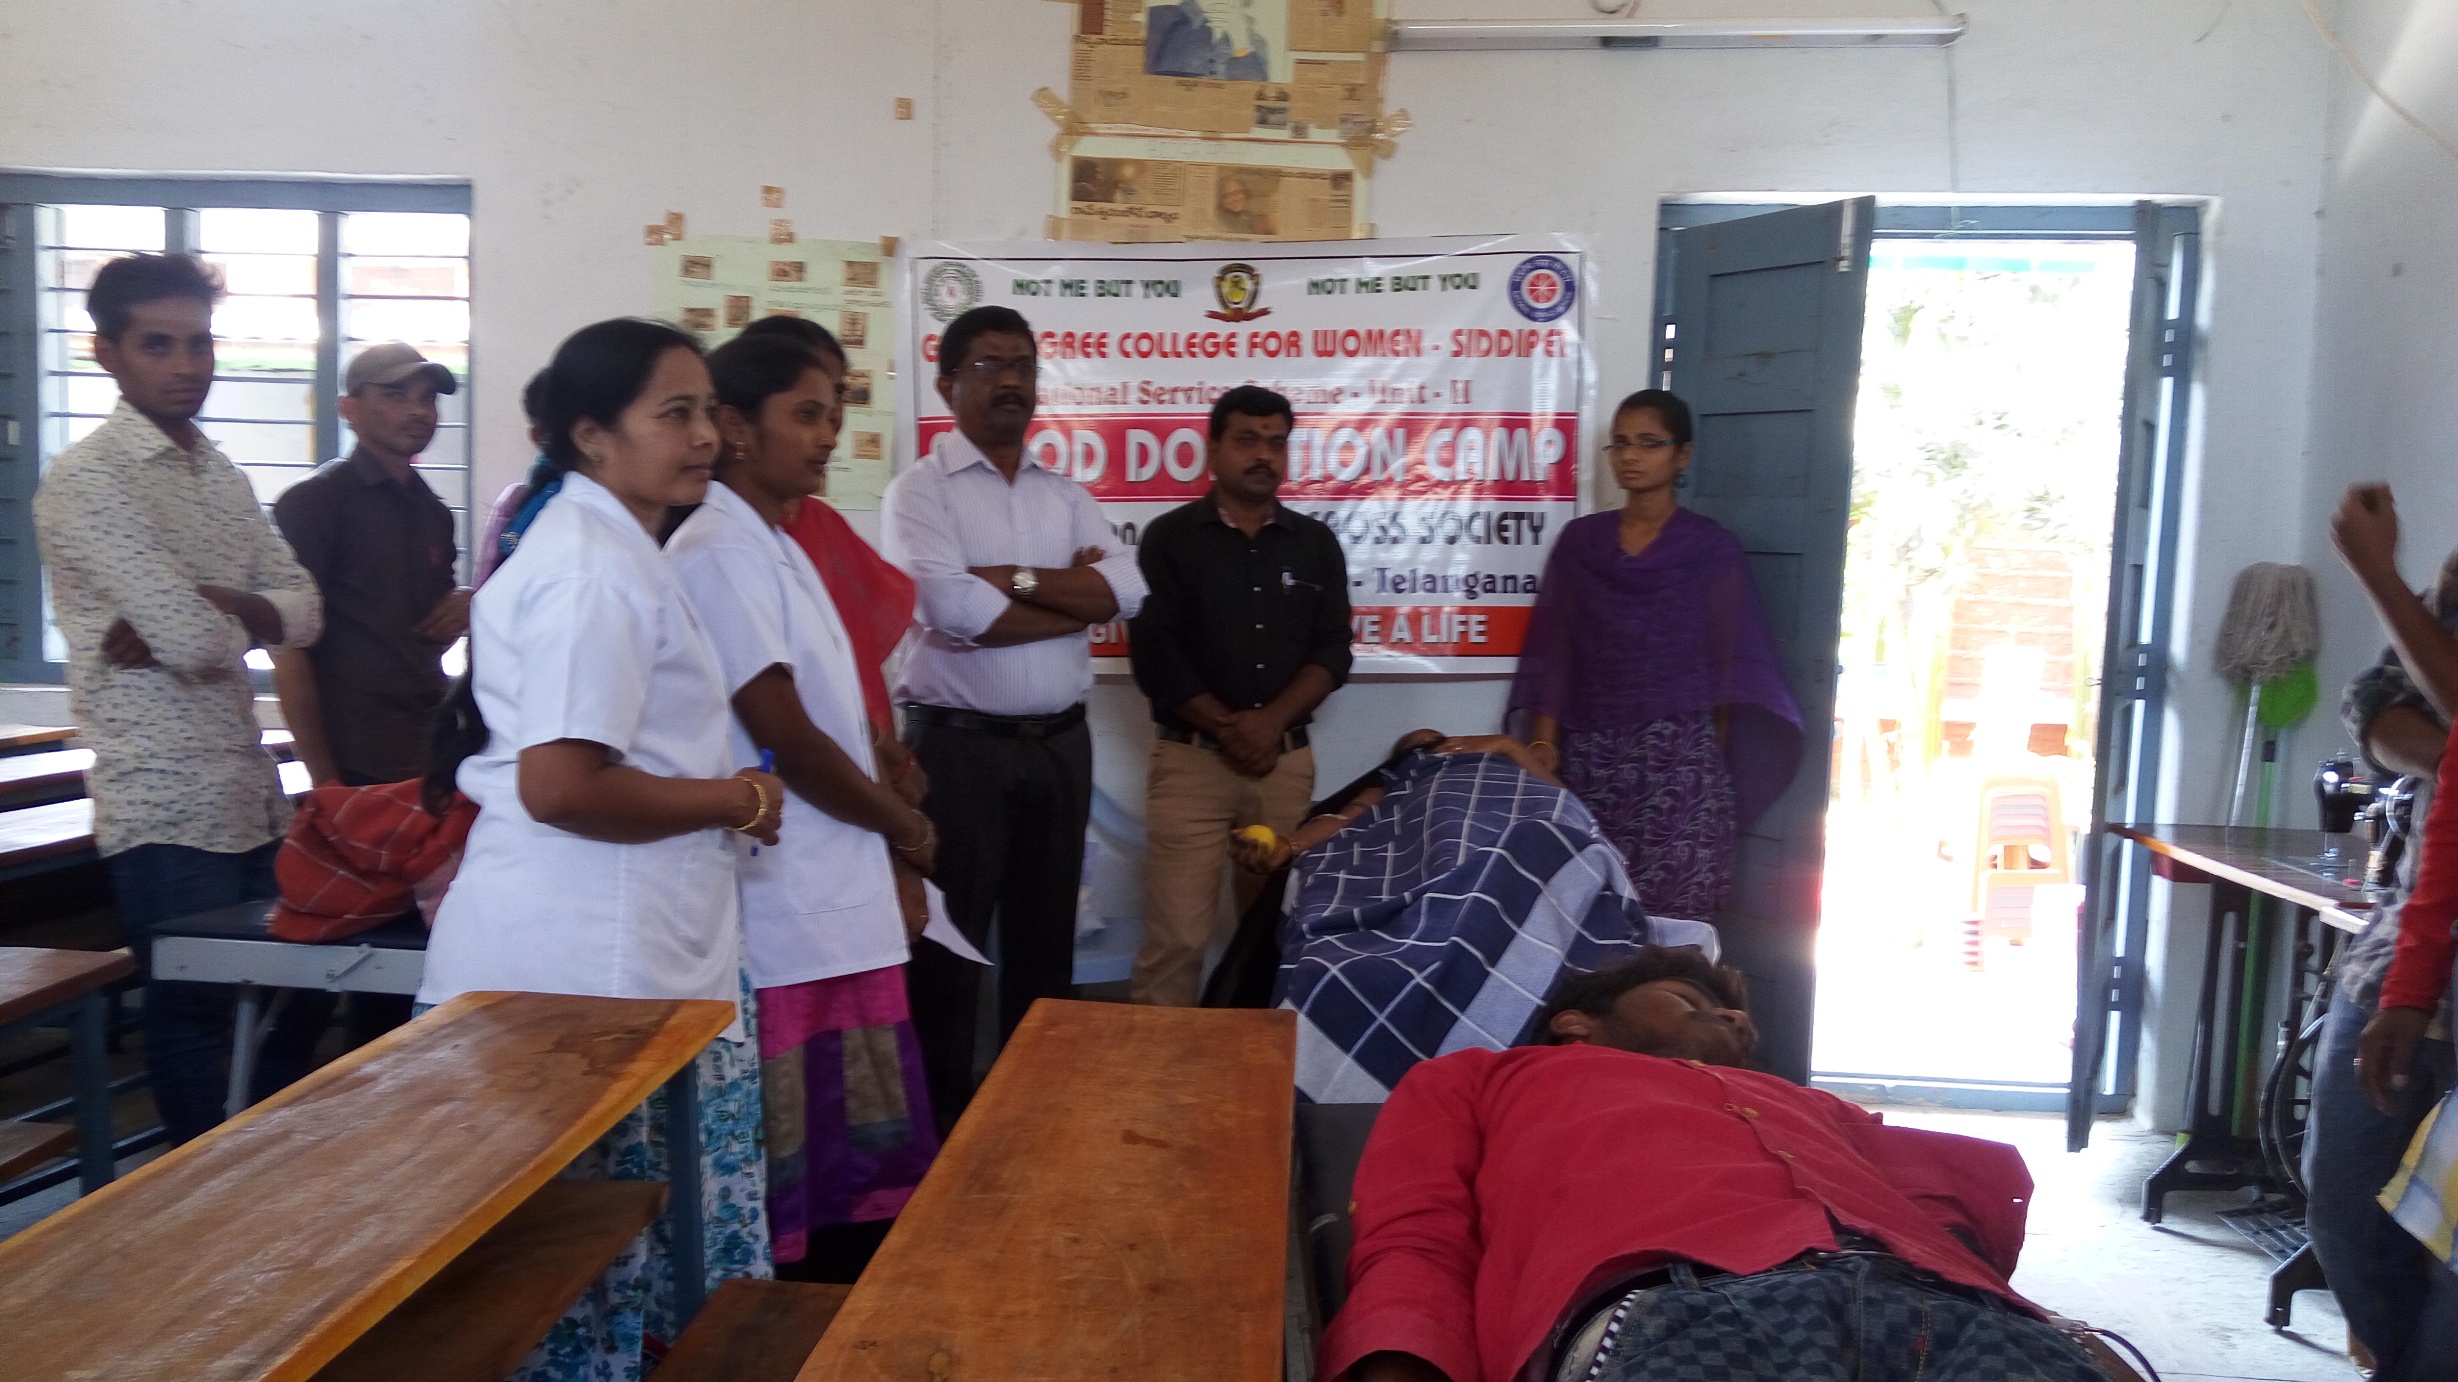 we conducted Blood Donation Camp after complete of the Health and Hygiene Meeting at our College by NSS Unit-II Programme officer Dr. S. Suvarna Devi, Conducted this programme with the help of Rcs